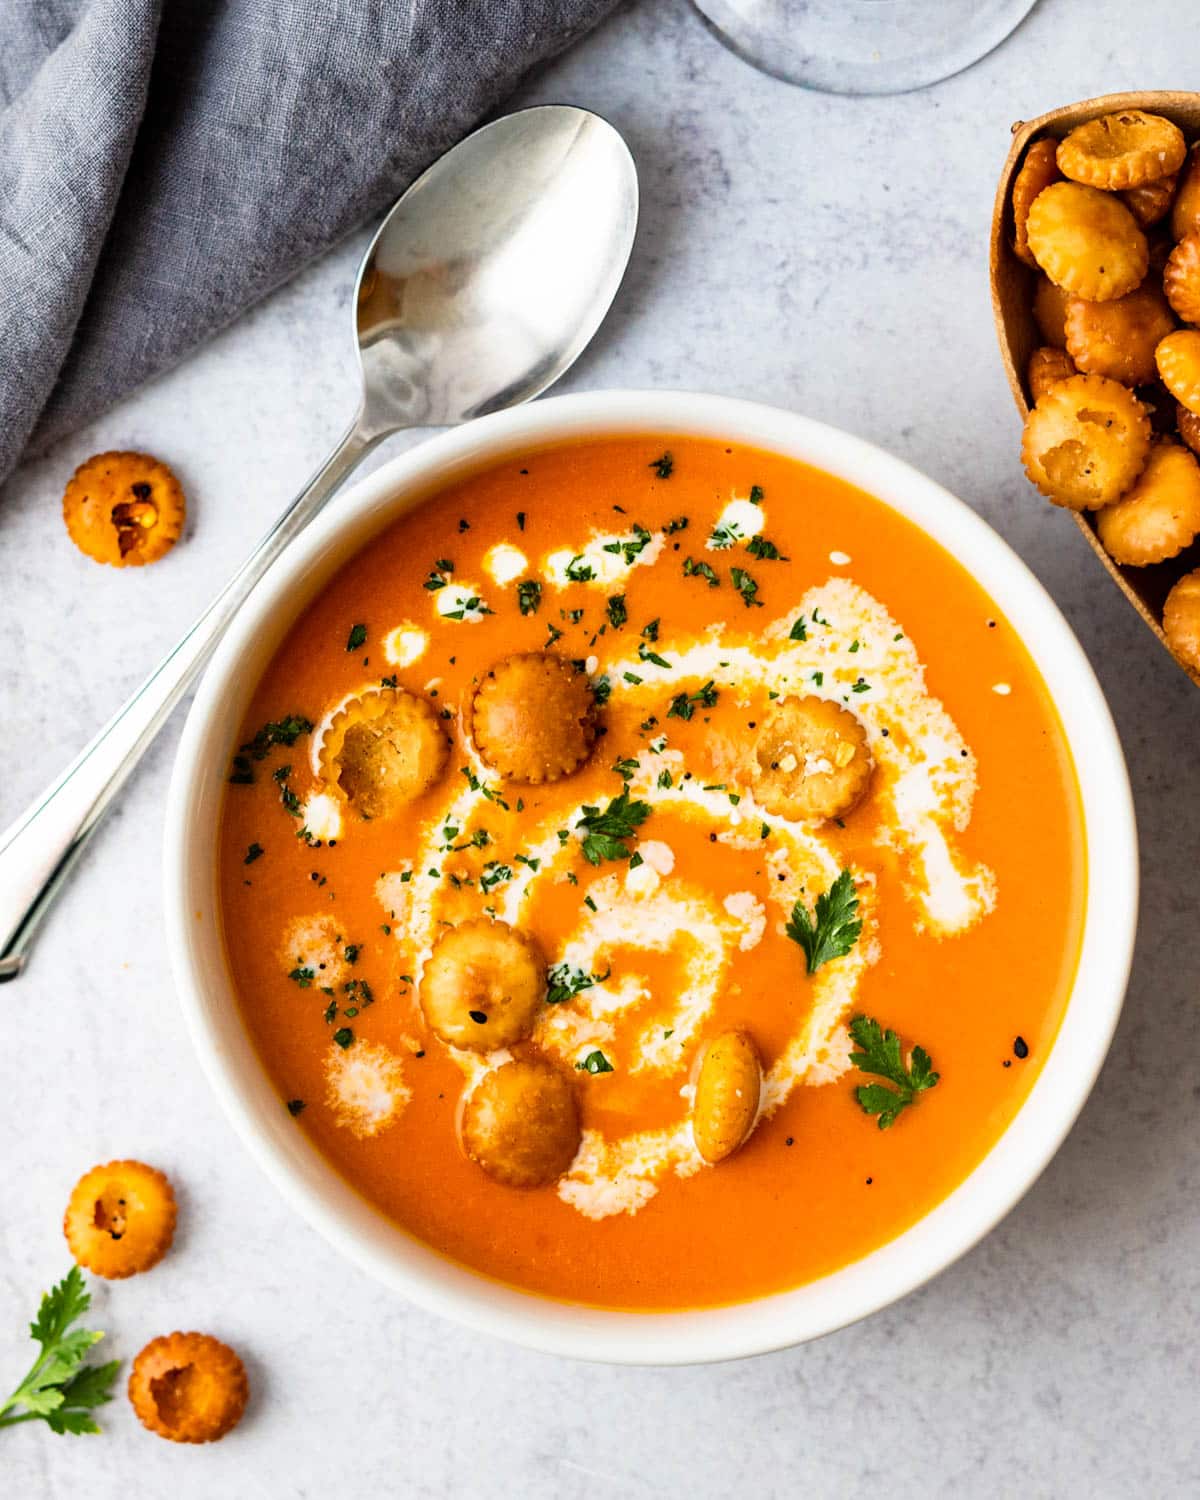 A bowl of creamy tomato and bell pepper soup with oyster crackers.